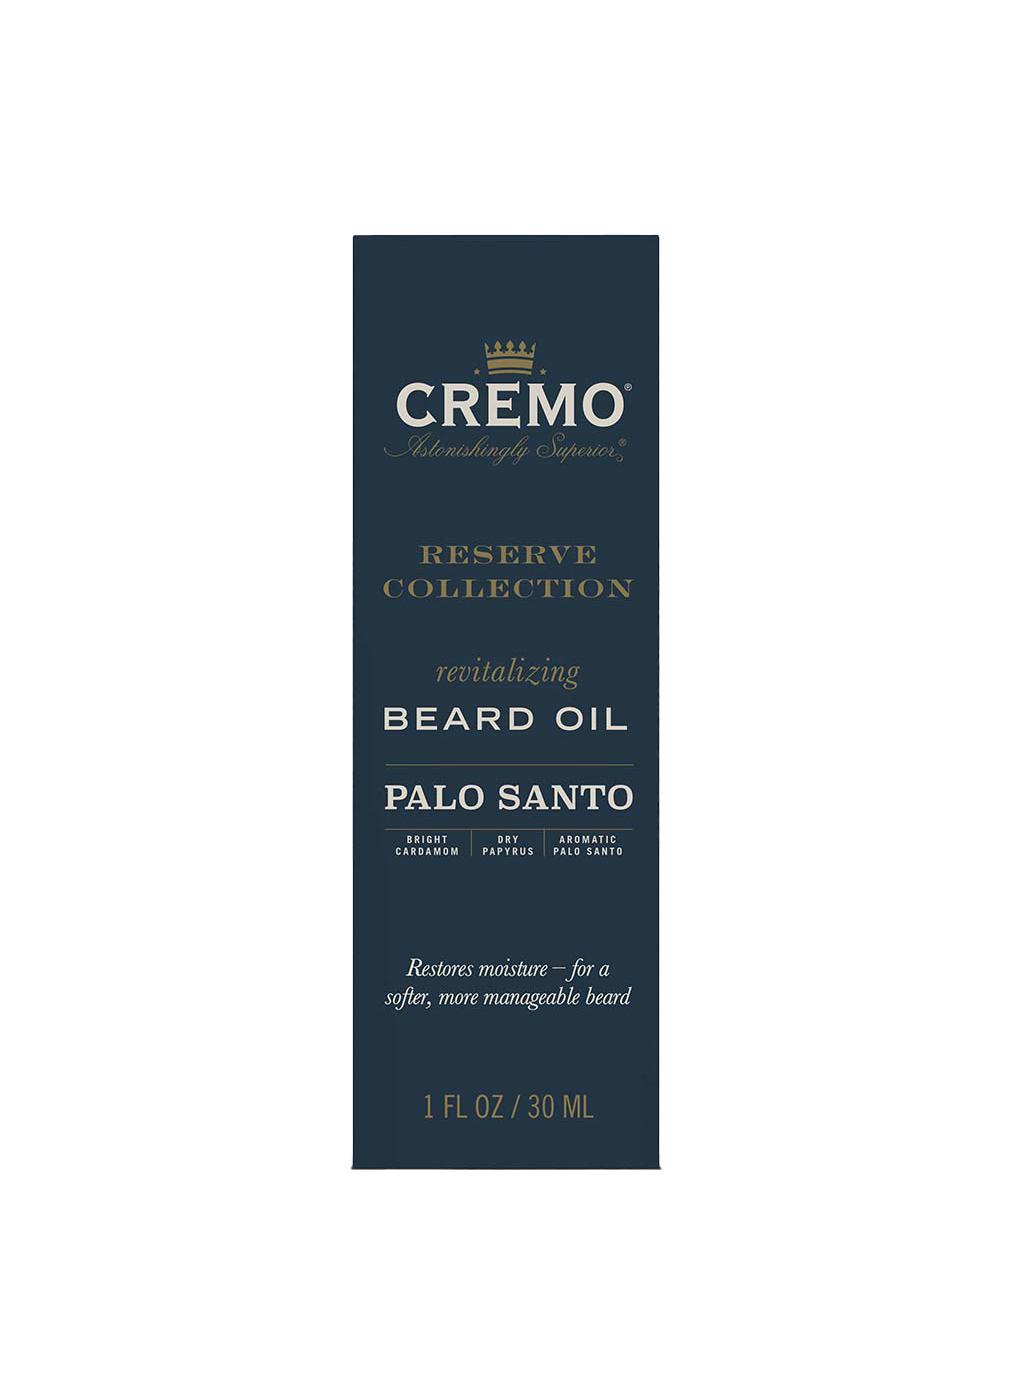 Cremo Reserve Collection Revitalizing Beard Oil - Palo Santo; image 1 of 3